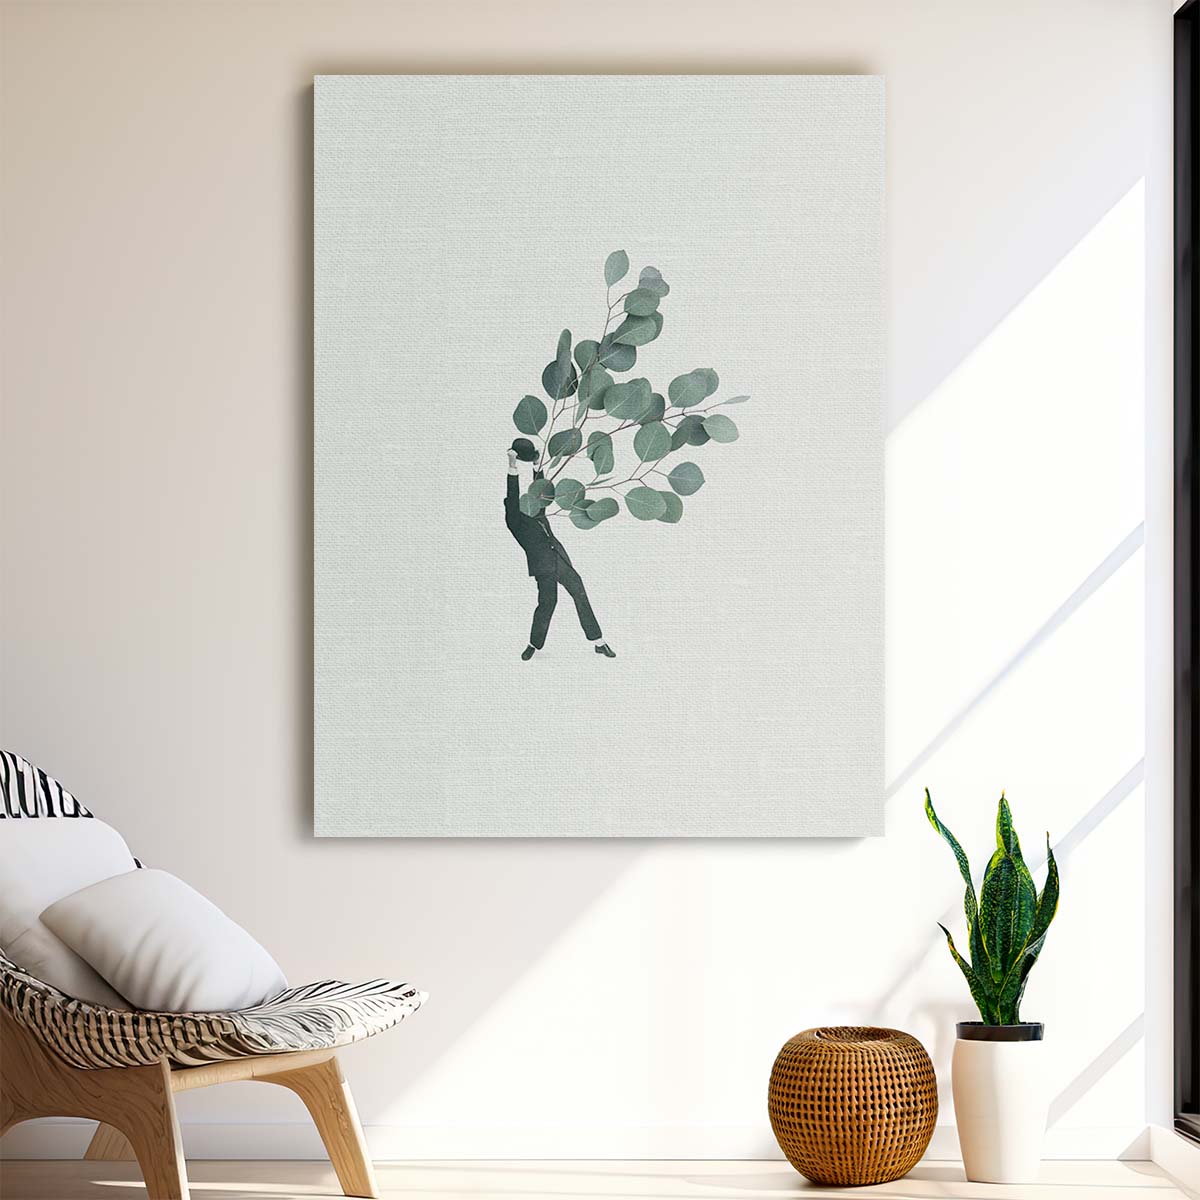 Mid-Century Surrealist Botanical Illustration - The Extravert by Maarten Leon by Luxuriance Designs, made in USA